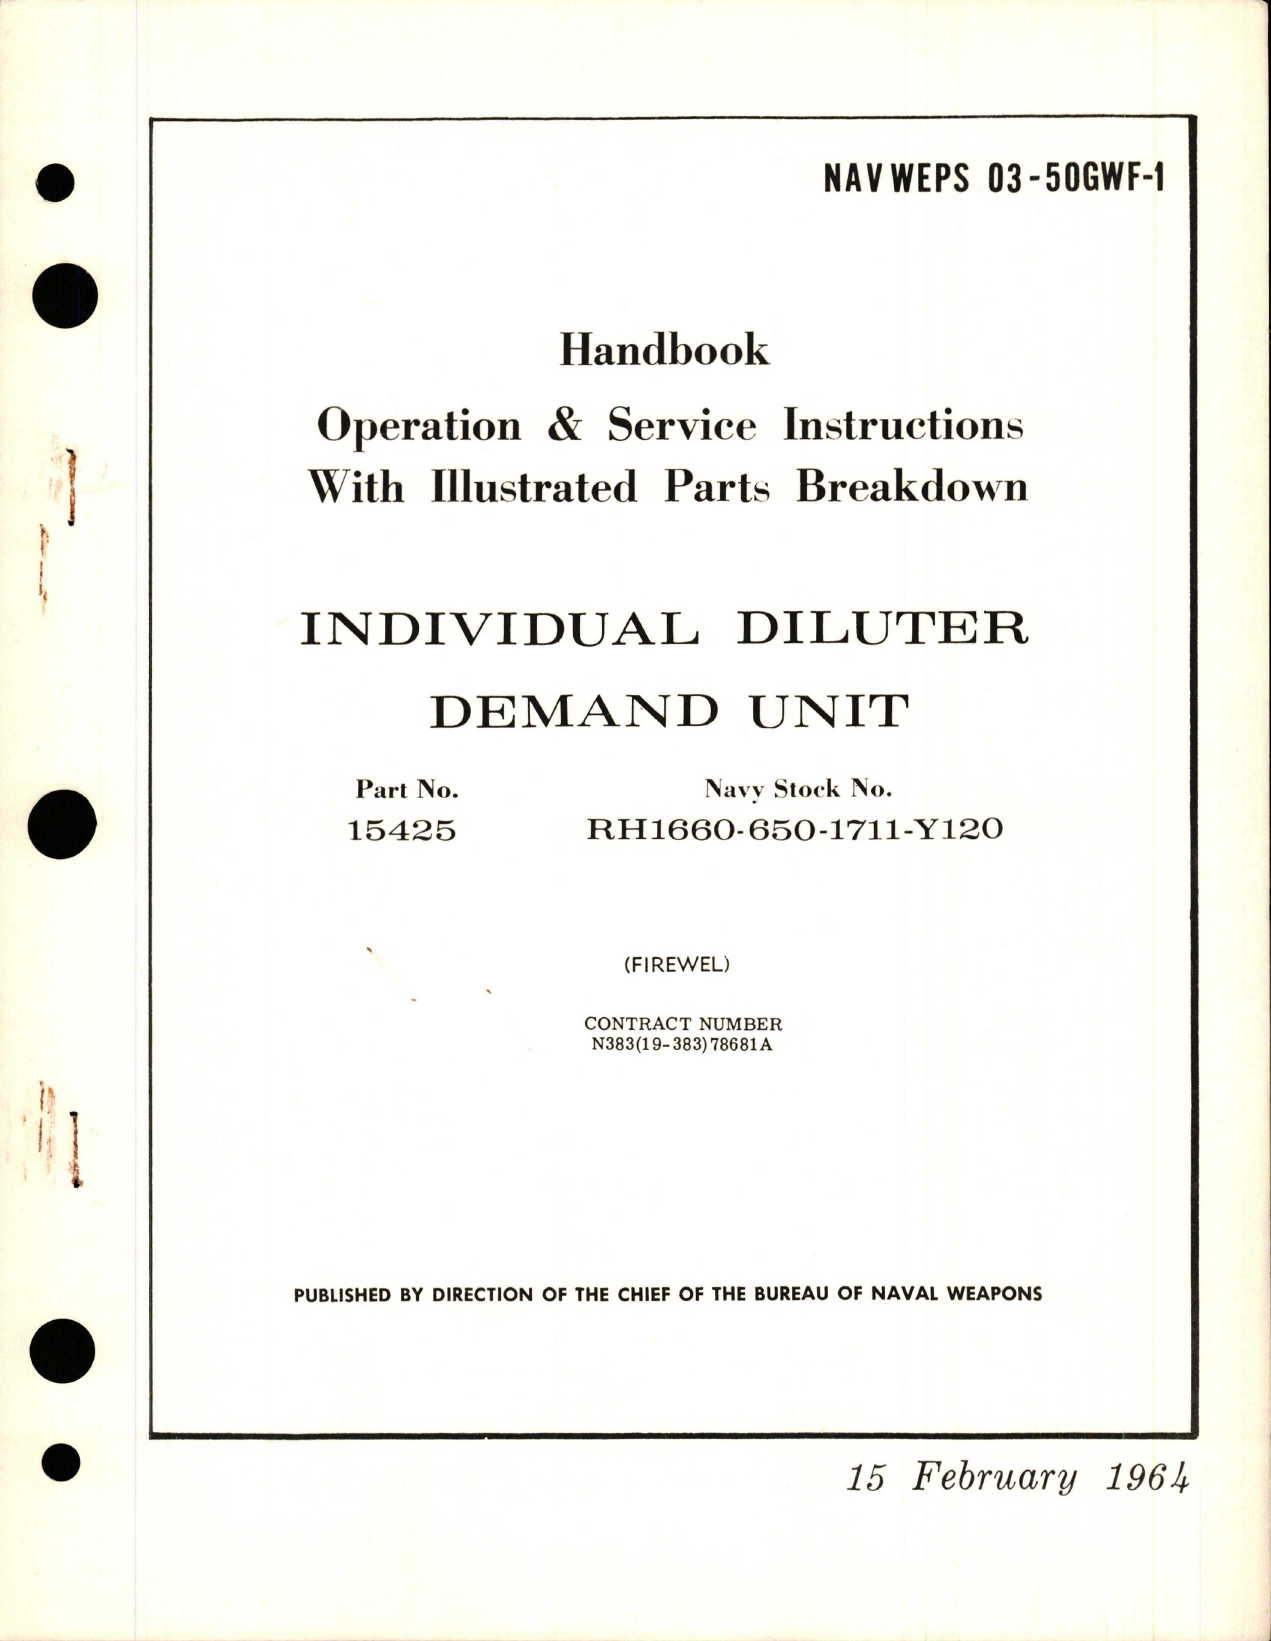 Sample page 1 from AirCorps Library document: Operation & Service Instructions with Illustrated Parts Breakdown for Individual Diluter Demand Unit - Part 15425